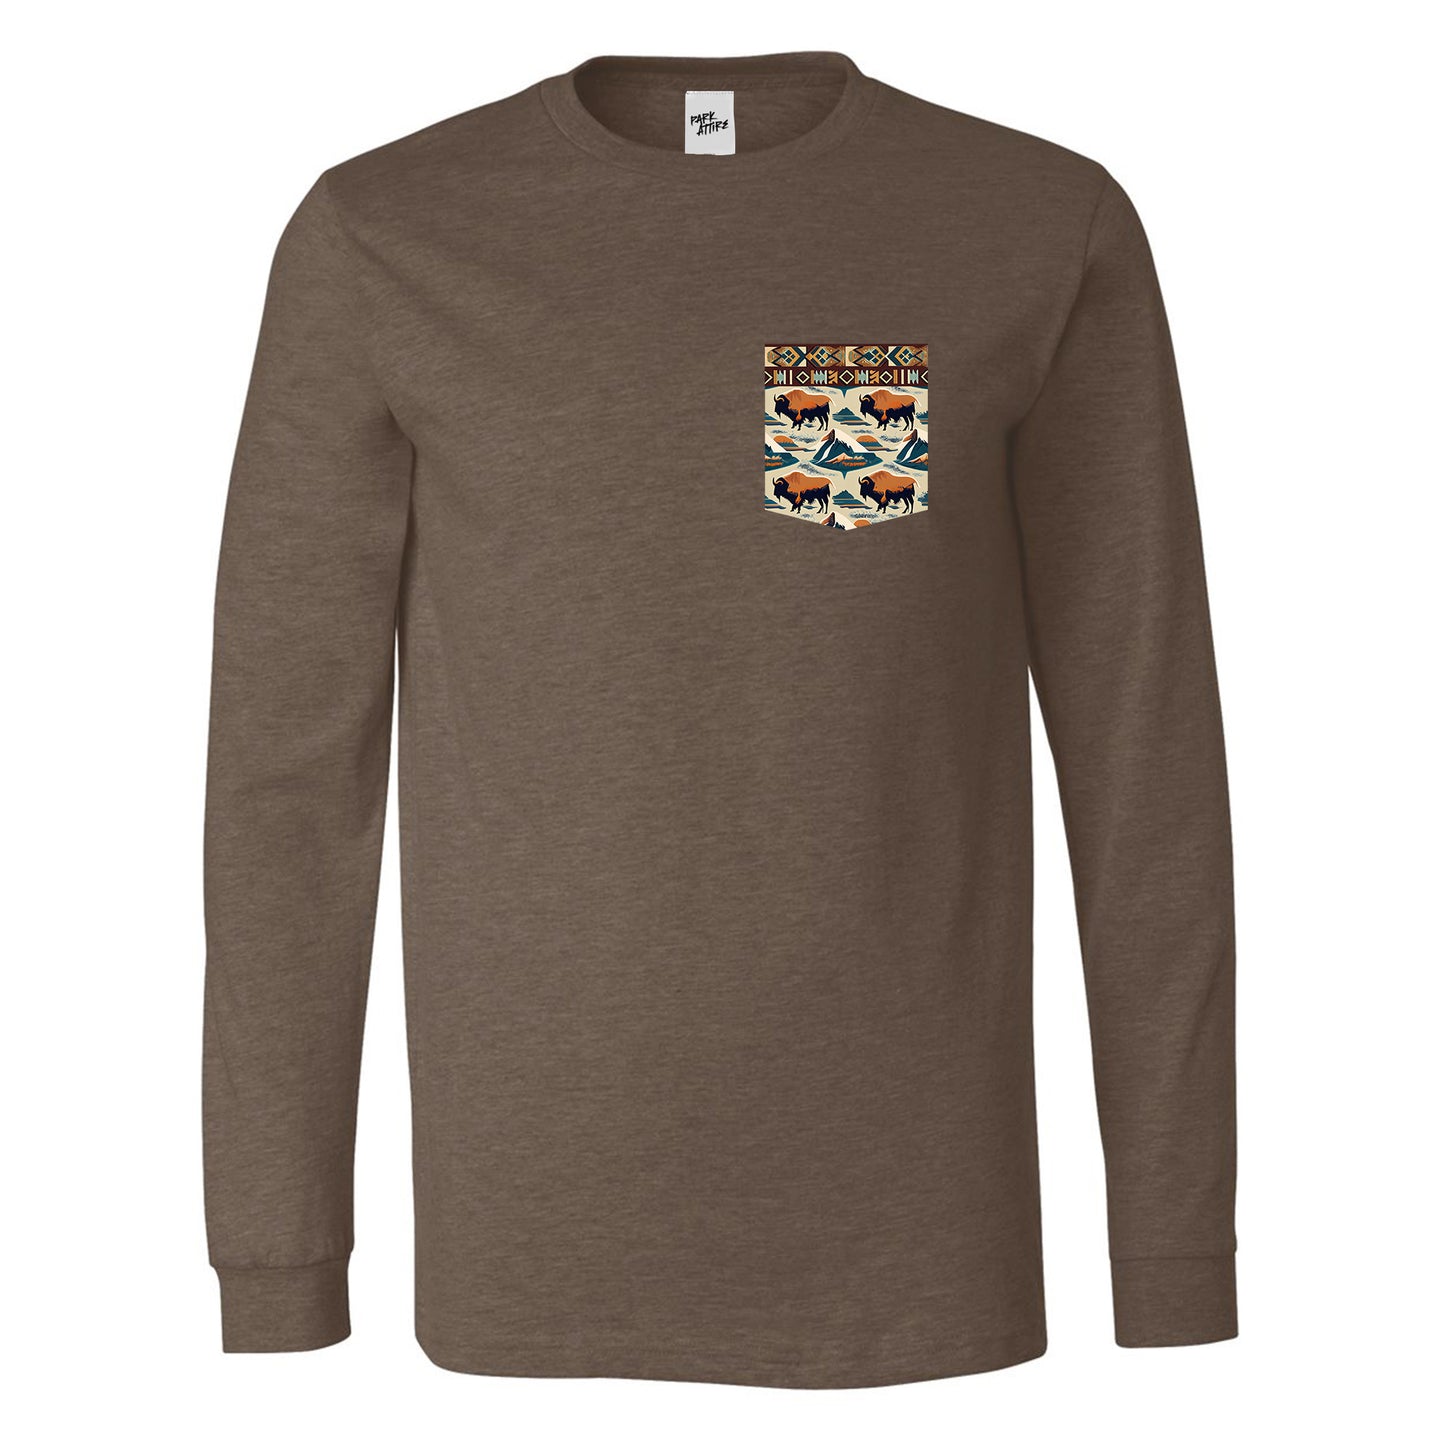 Front view of Montana in Streetwear Montana Heather Brown Long Sleeve T-Shirt from Park Attire